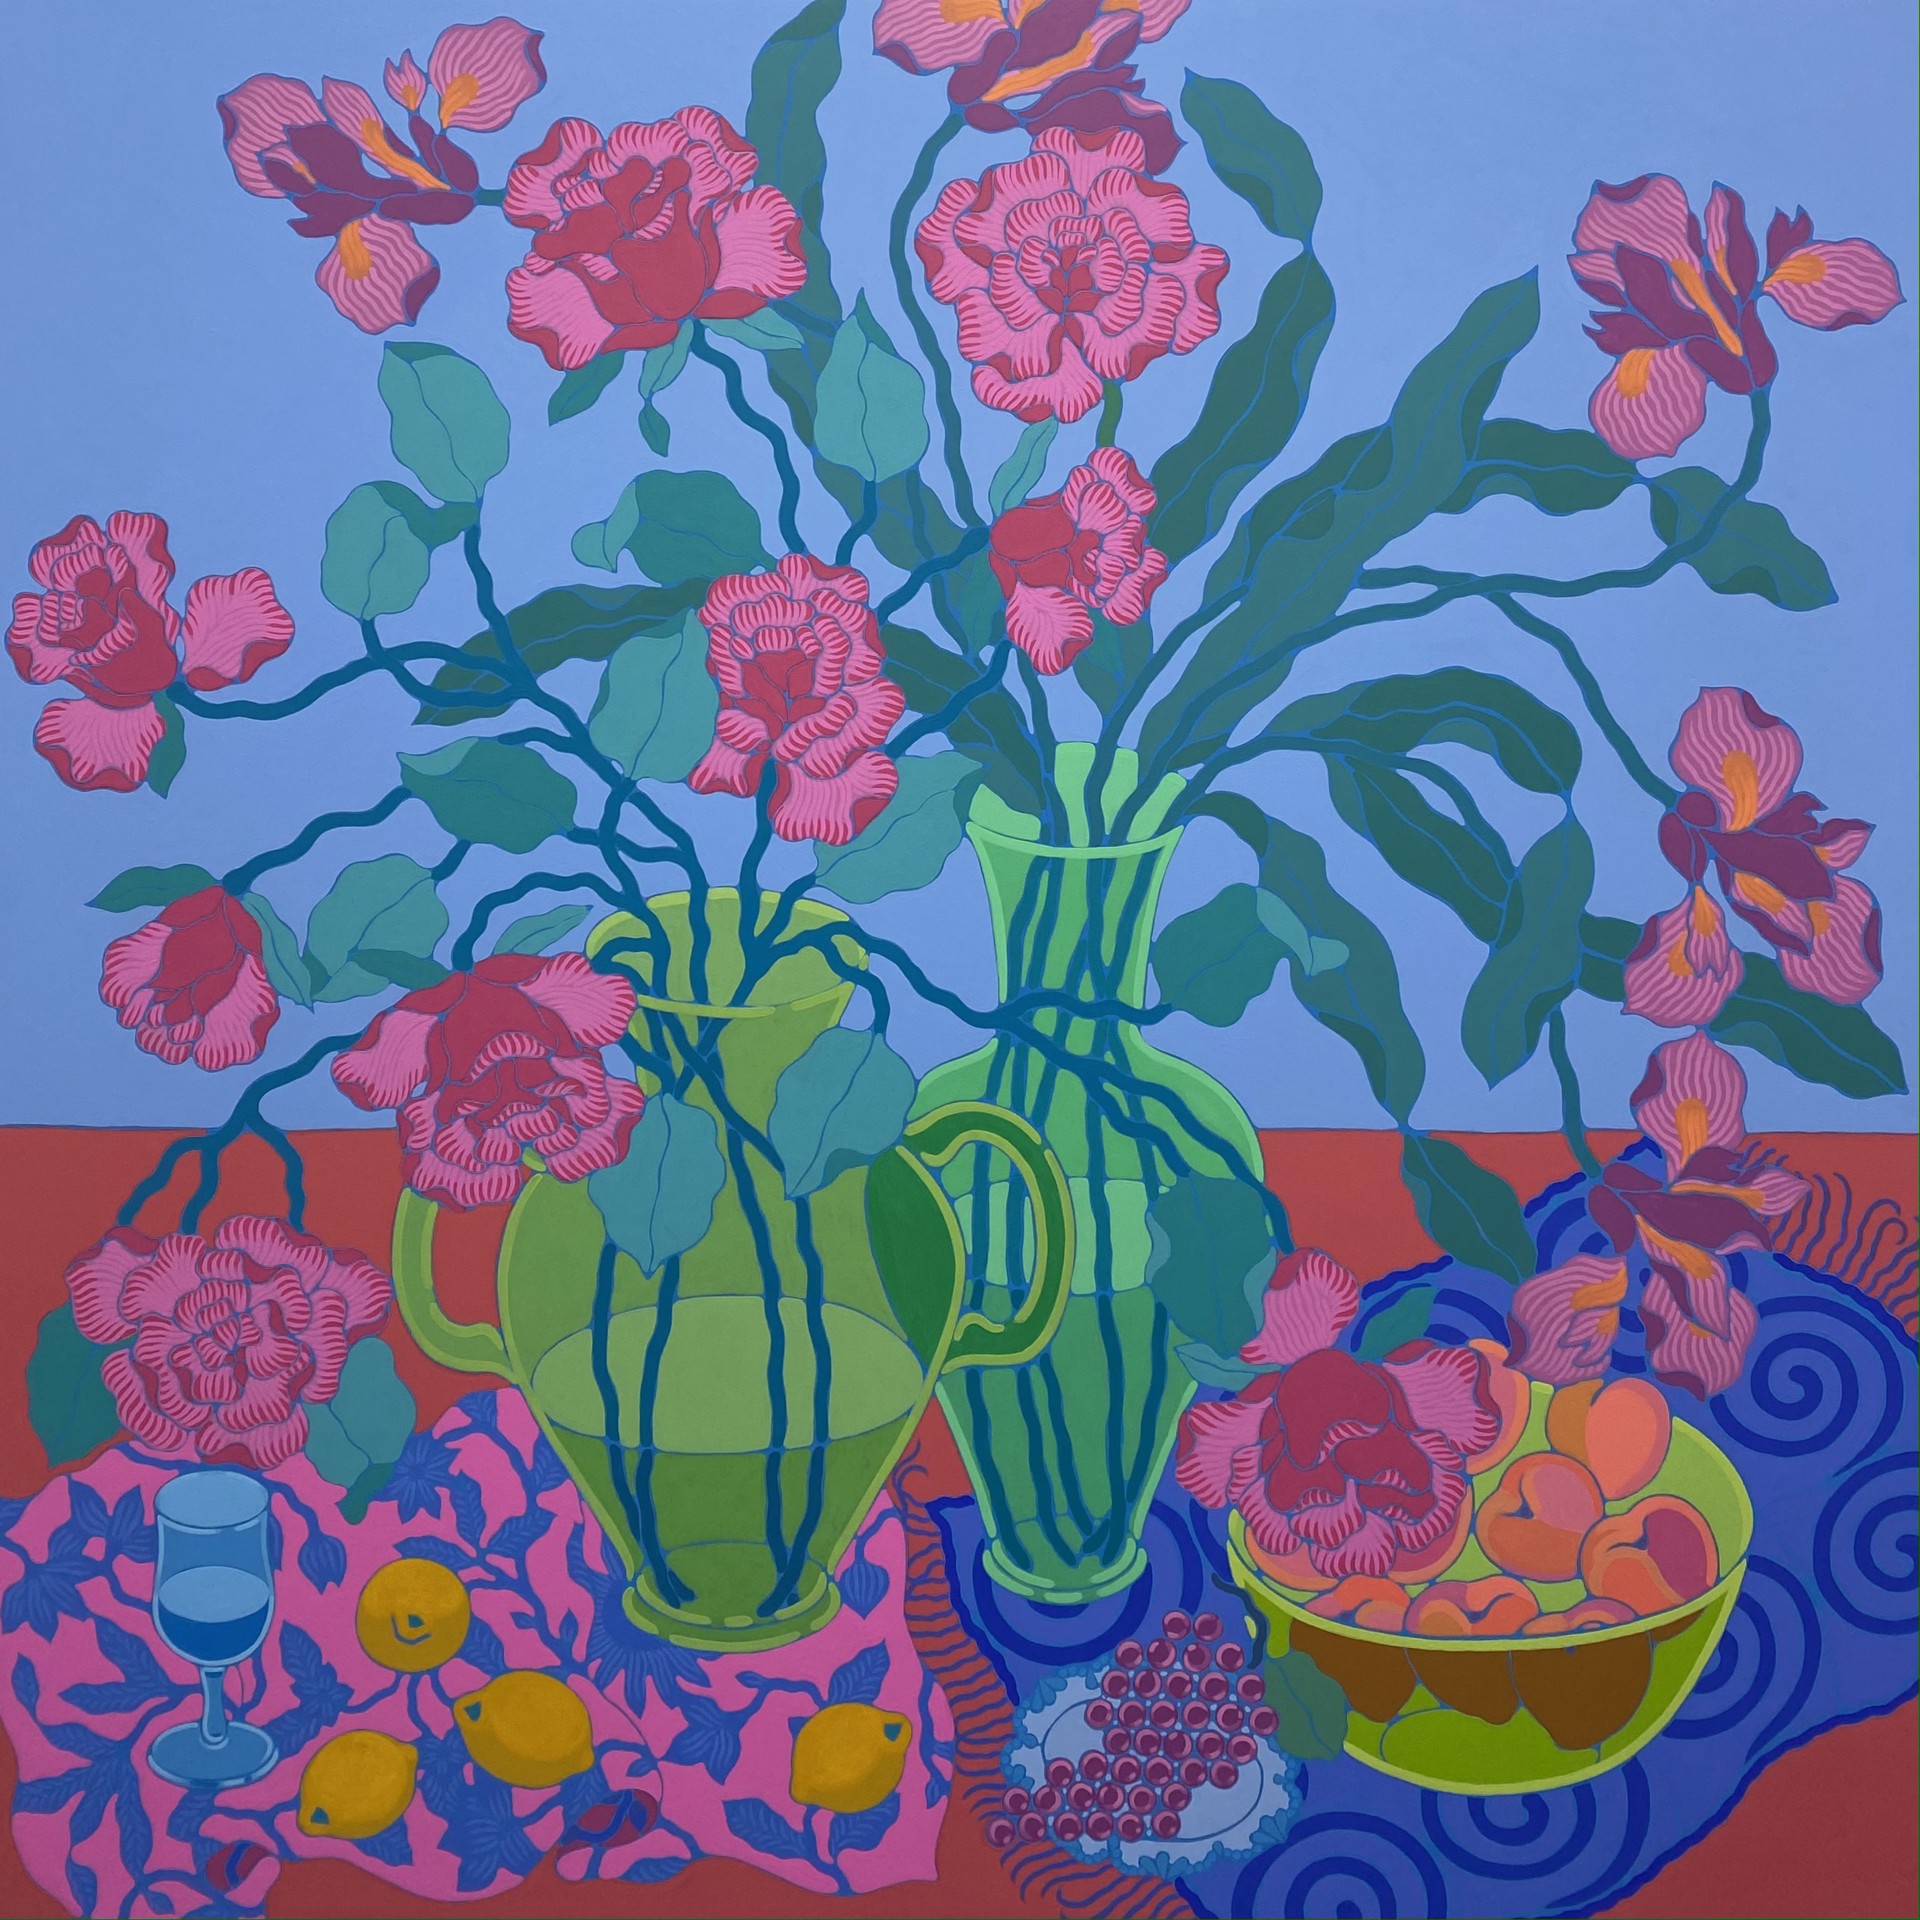 Red Rose Dipping into Neon Green Bowl Full of Peaches by Sarah Ingraham